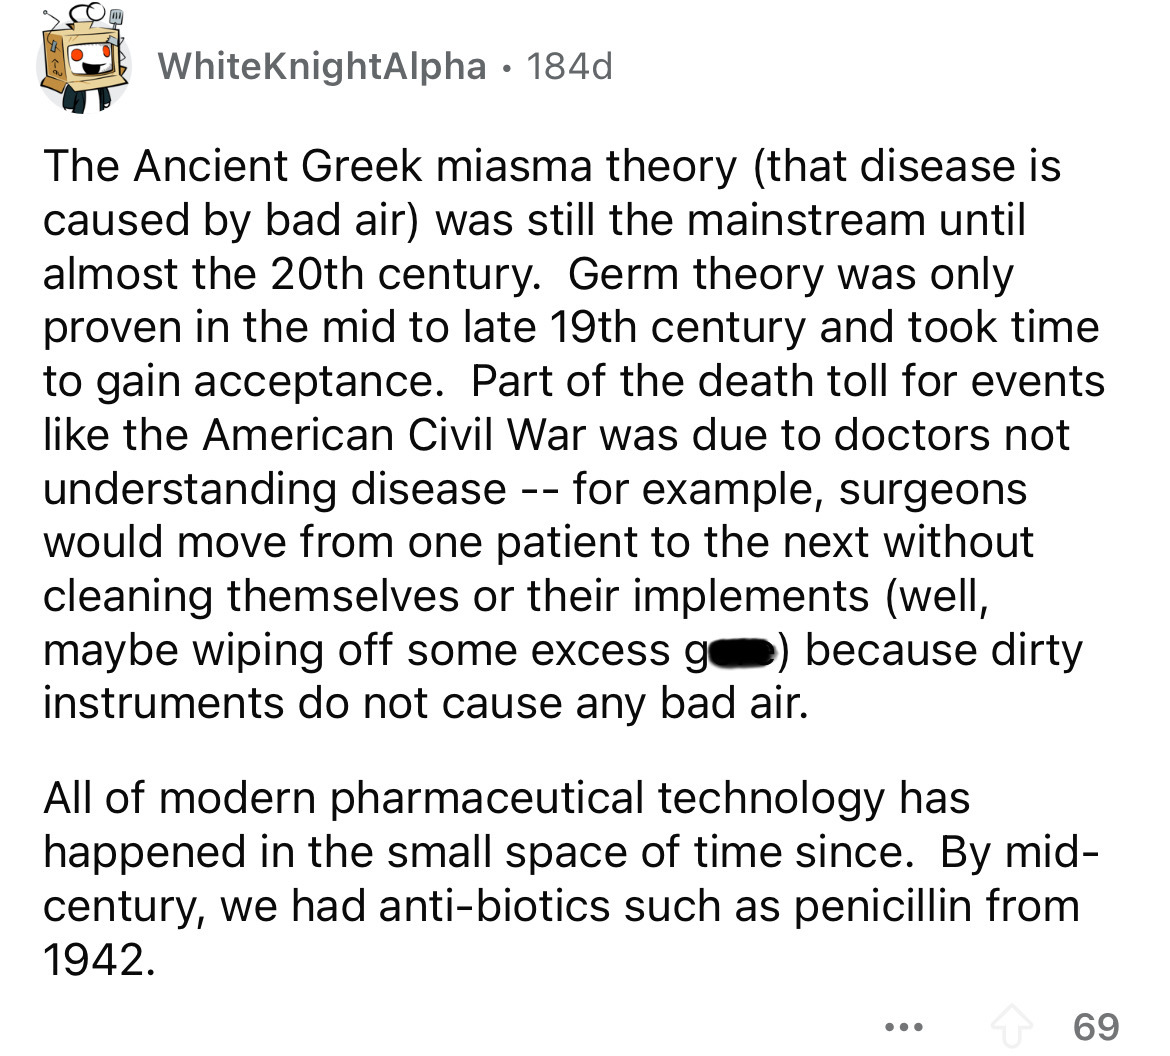 number - White KnightAlpha 184d The Ancient Greek miasma theory that disease is caused by bad air was still the mainstream until almost the 20th century. Germ theory was only proven in the mid to late 19th century and took time to gain acceptance. Part of